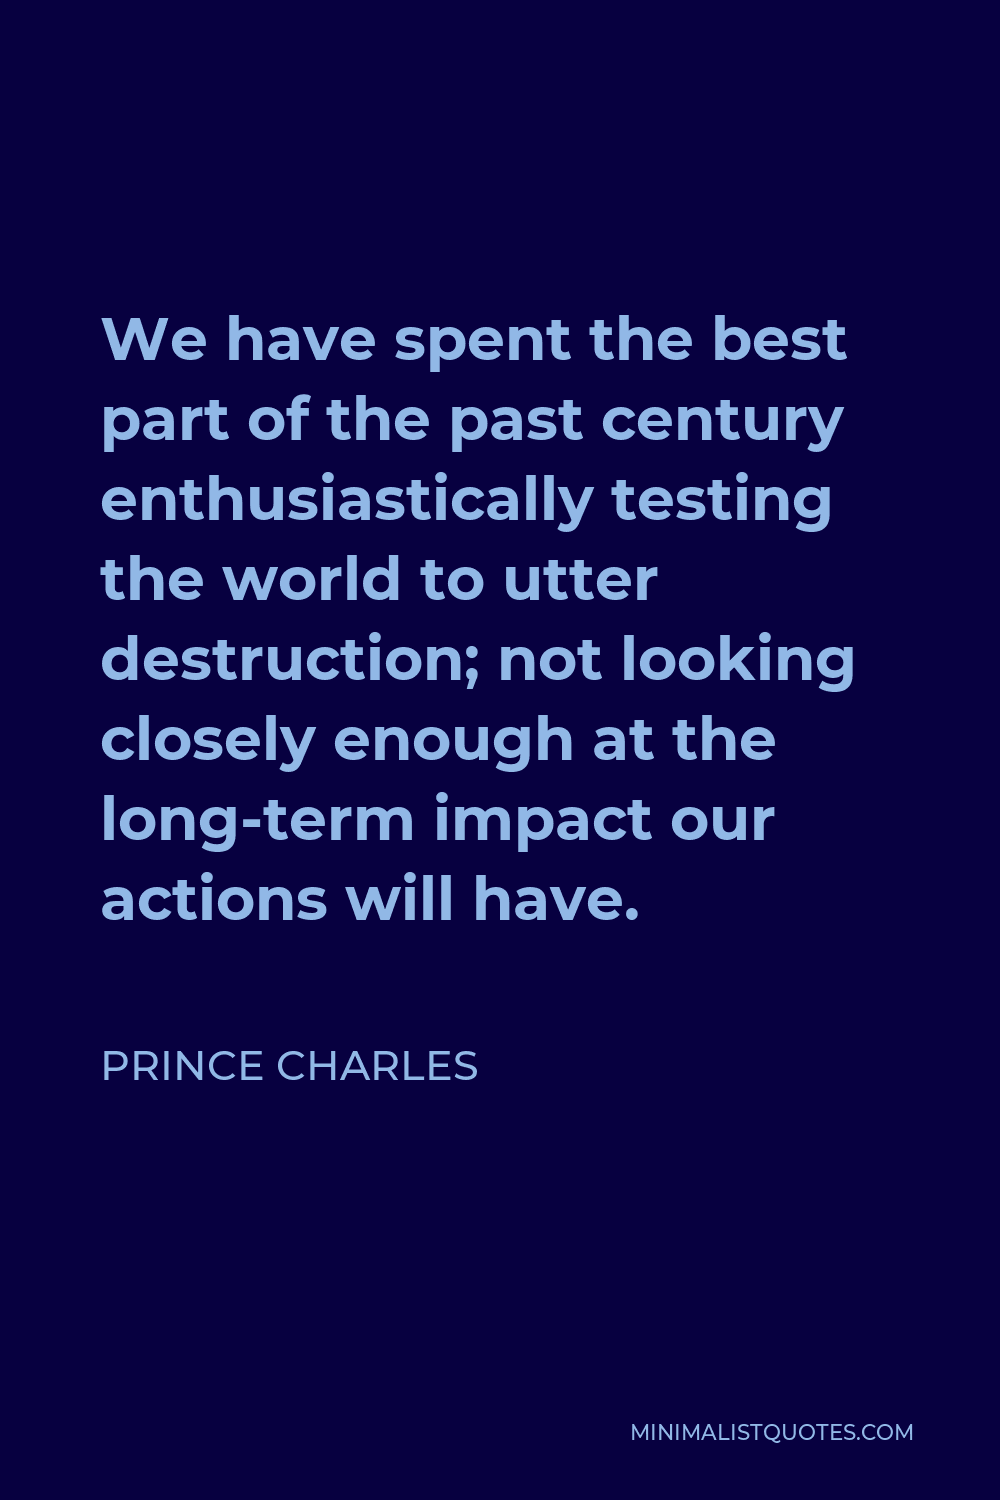 Prince Charles Quote - We have spent the best part of the past century enthusiastically testing the world to utter destruction; not looking closely enough at the long-term impact our actions will have.